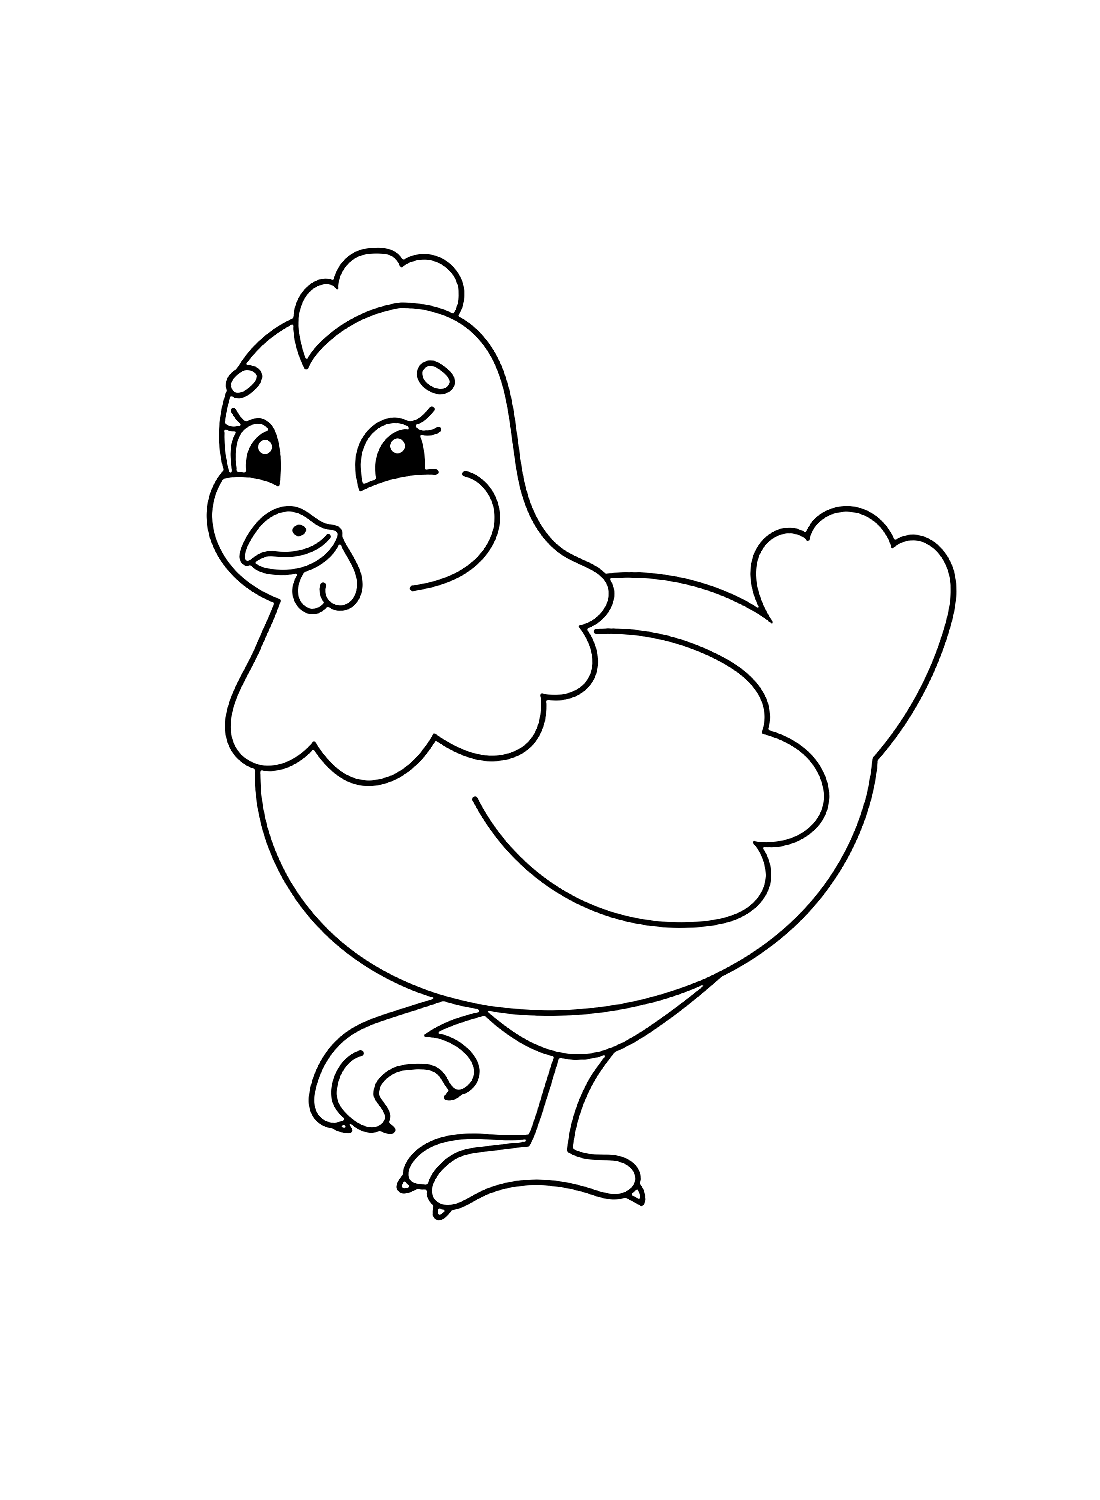 A cute hen Coloring Page - Free Printable Coloring Pages